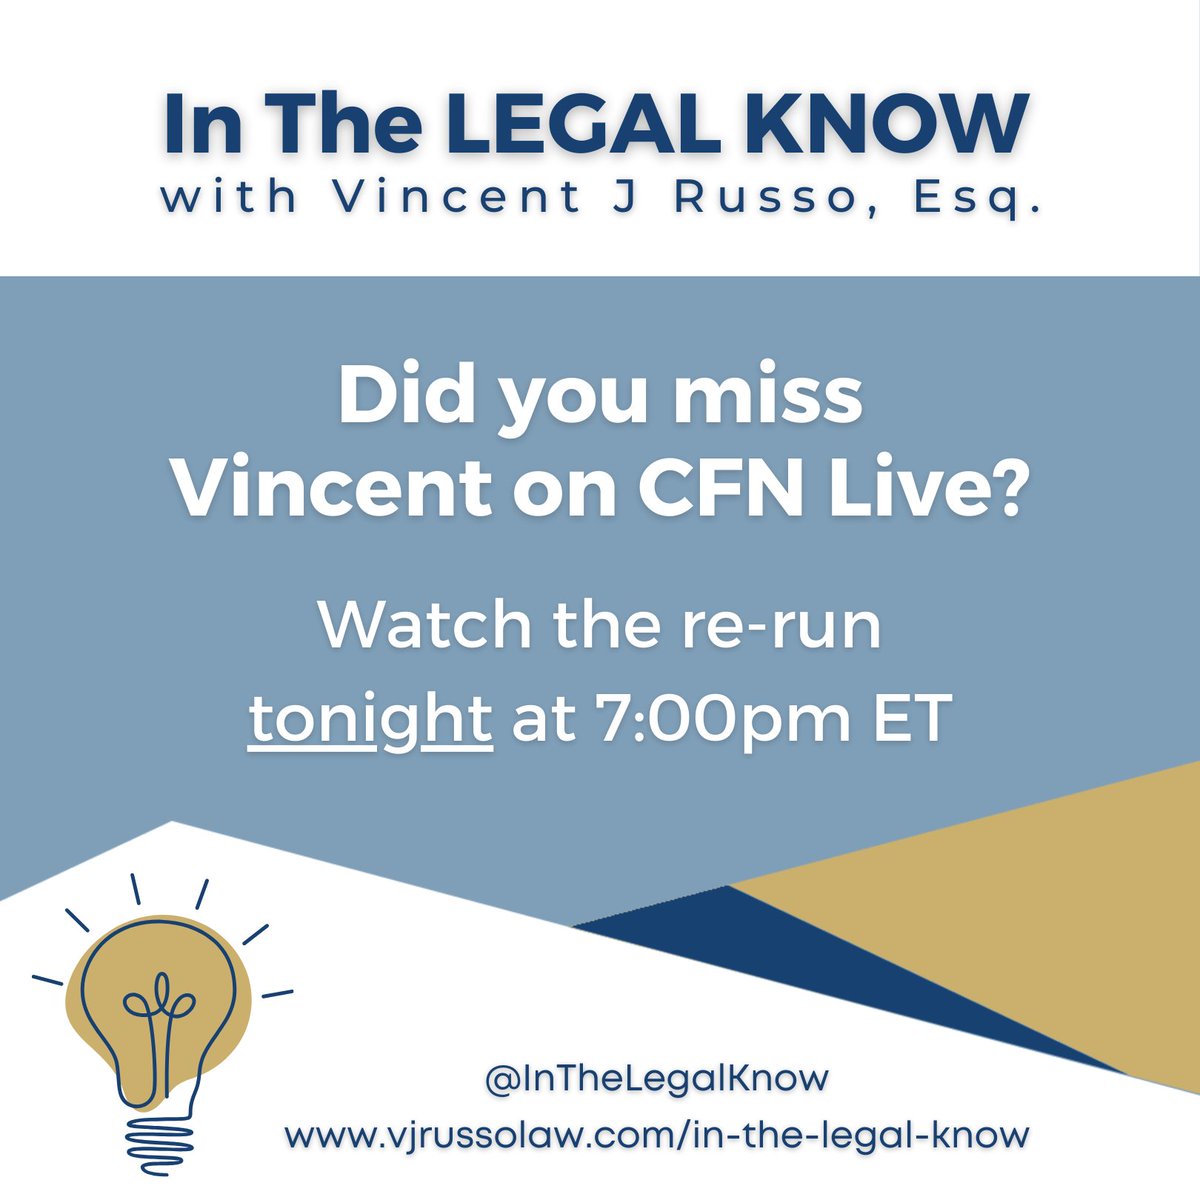 Did you catch “In The Legal Know” this morning? Watch the re-run at 7pm ET tonight. Learn the benefits of a #MedicaidAssetProtectionTrust, how it can protect assets, and how it can help you avoid #Medicaid estate recovery. #russolawgroup #inthelegalknow #CFNLive #medicaidtips